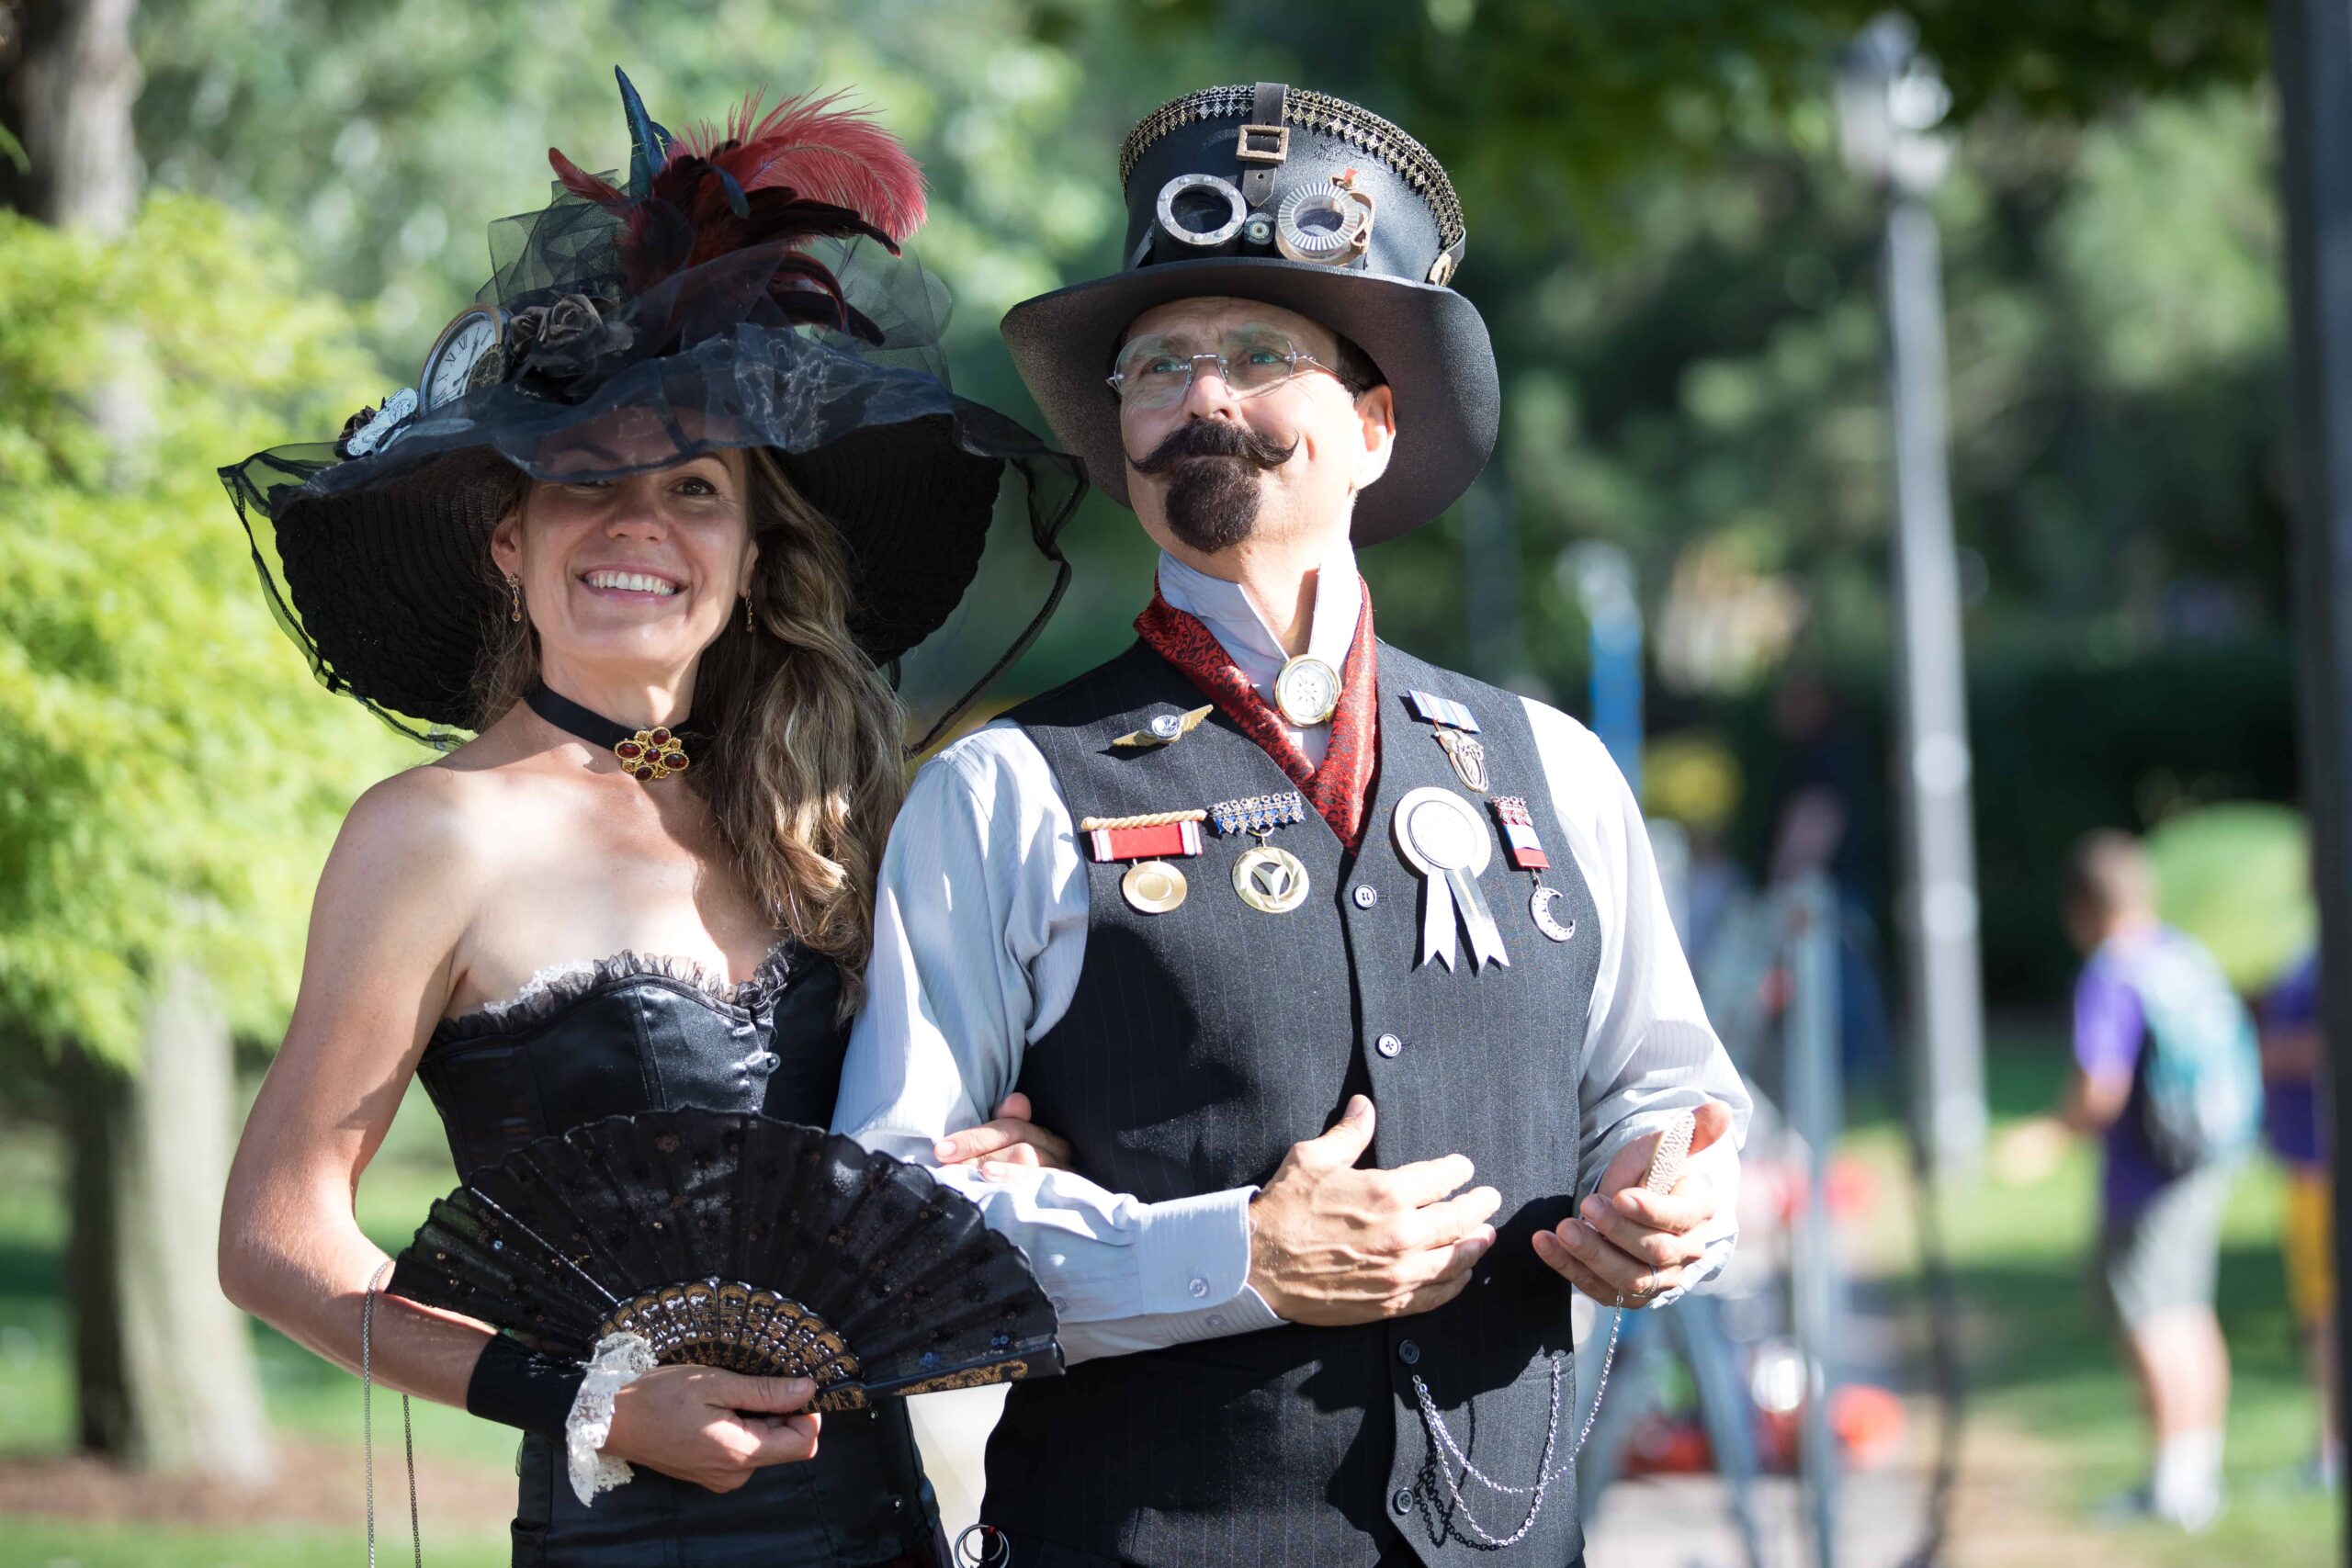 A steampunk cosplaying couple.